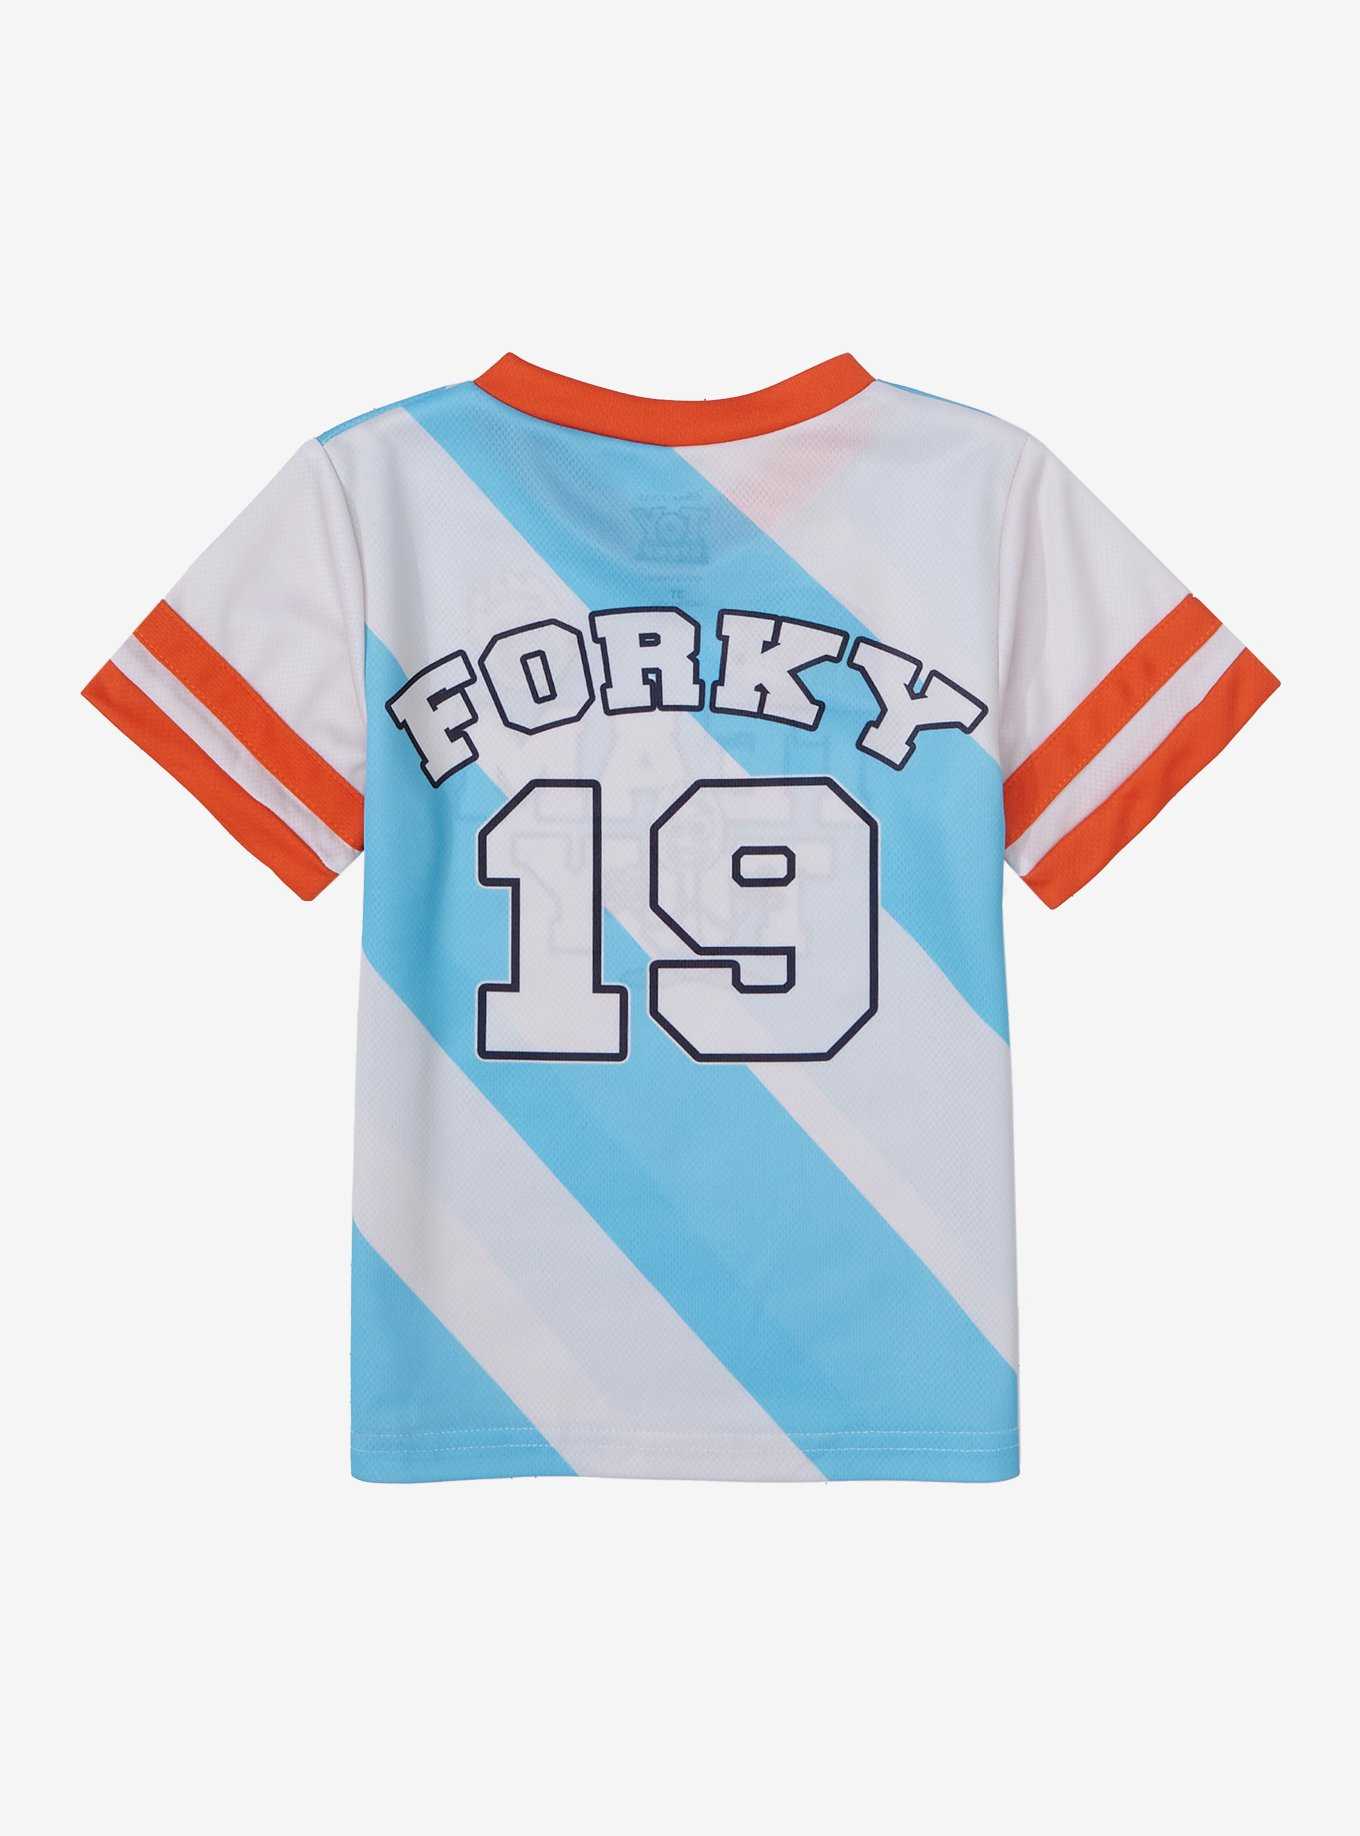 Disney Pixar Toy Story Forky Toddler Soccer Jersey - BoxLunch Exclusive, , hi-res